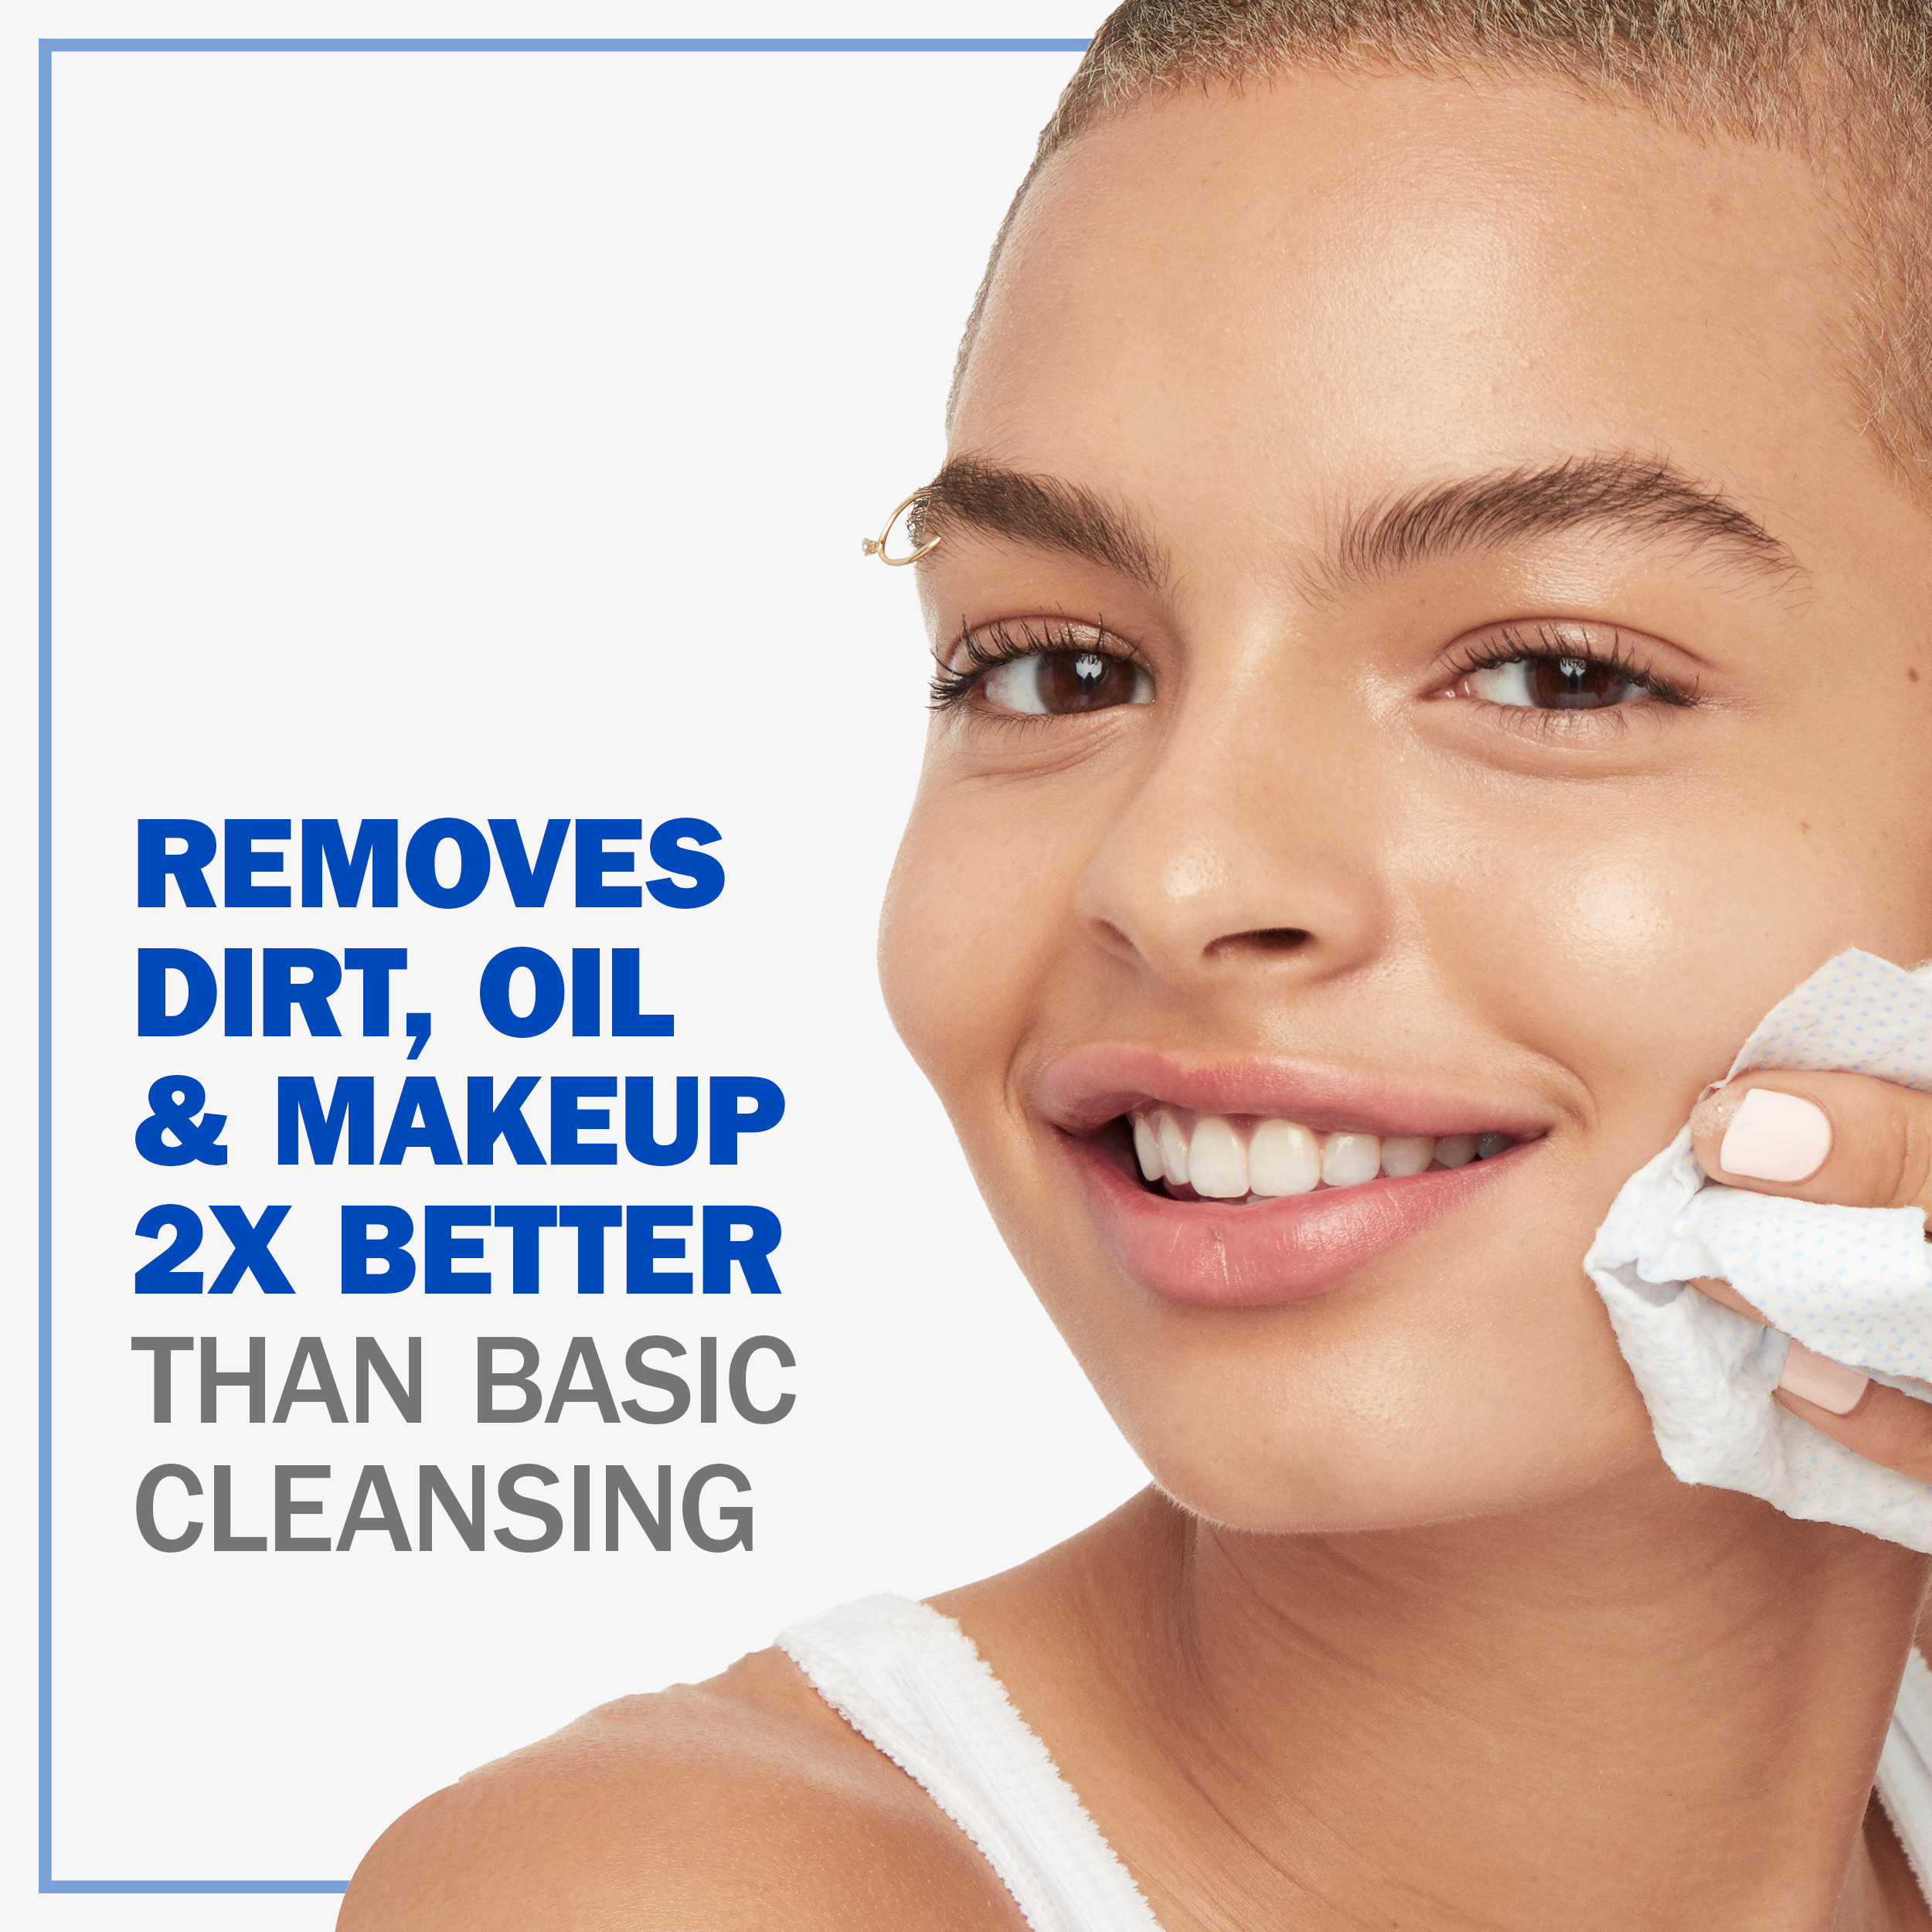 Olay Daily Skincare Deeply Purifying Cleansing Facial Wipes, Fragrance-Free, All Skin Types 66 Count - image 3 of 10